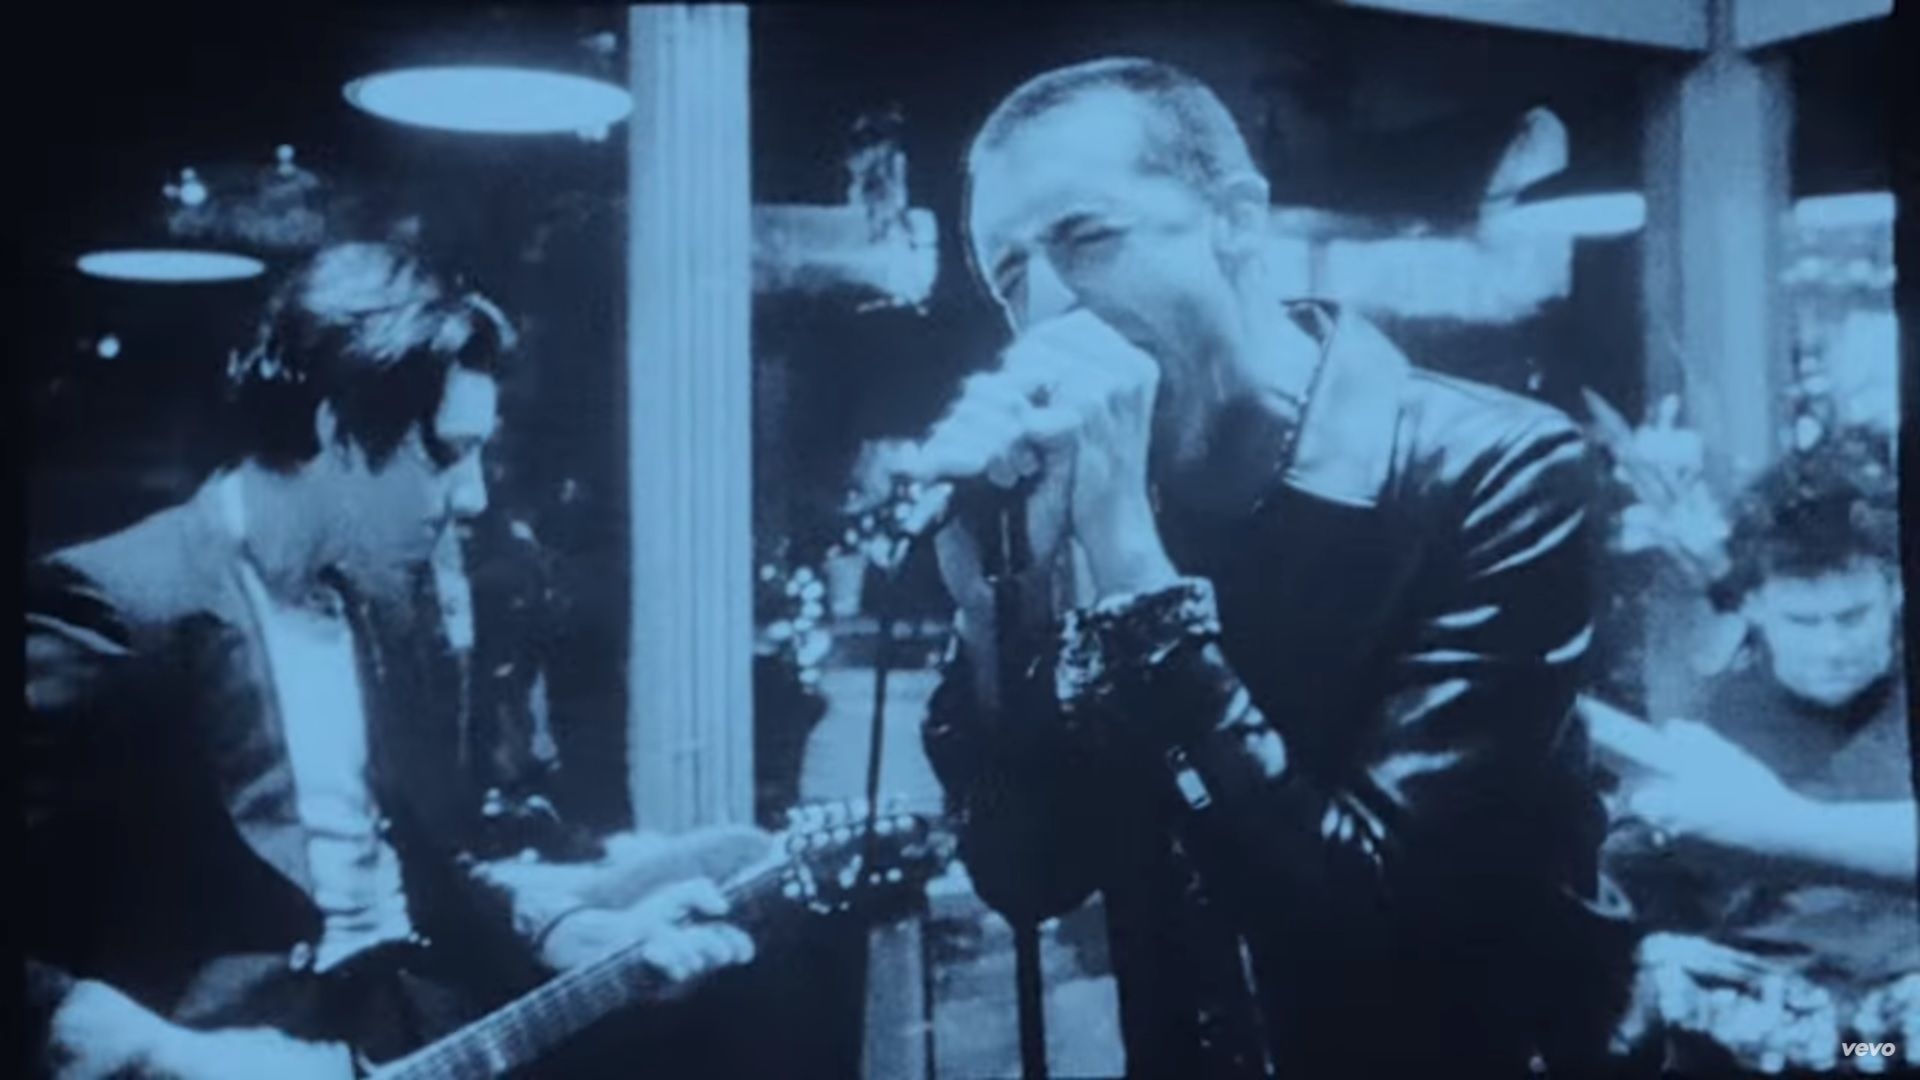 VIDEO: The Last Shadow Puppets' 'Bad Habits'